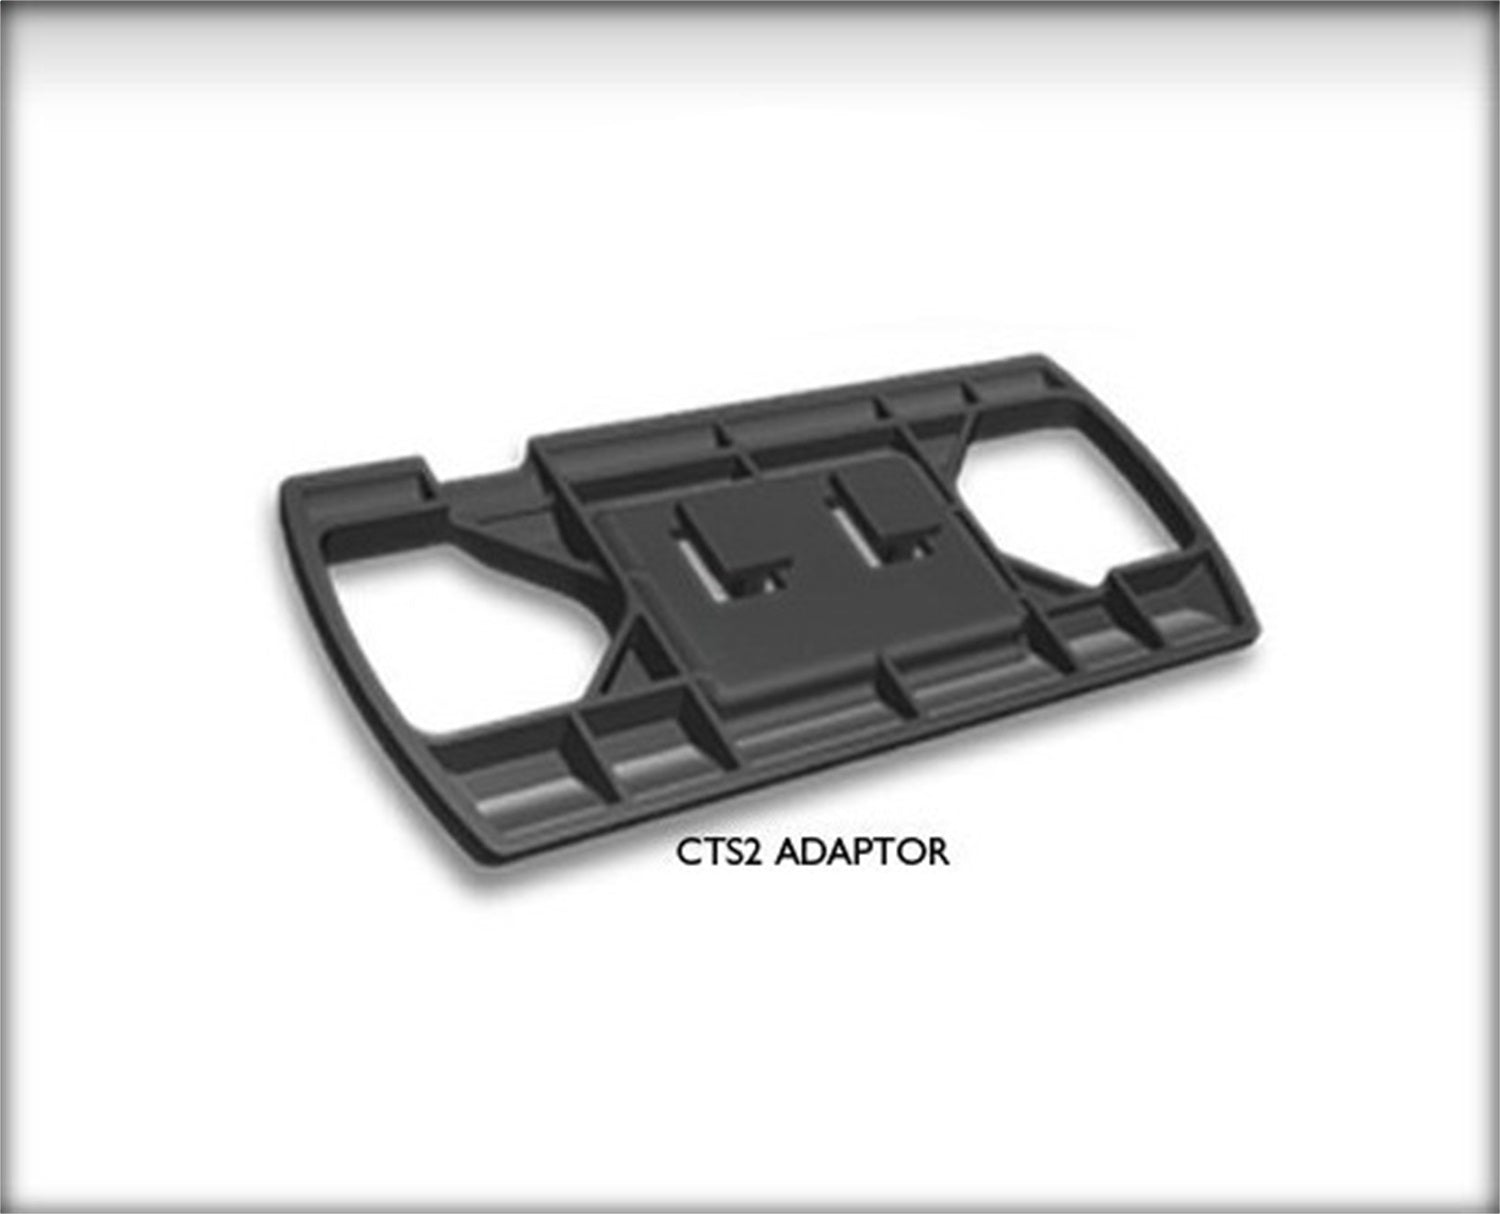 For 1999-2004 Ford f-series dash pod comes with cts and cts2 adaptors